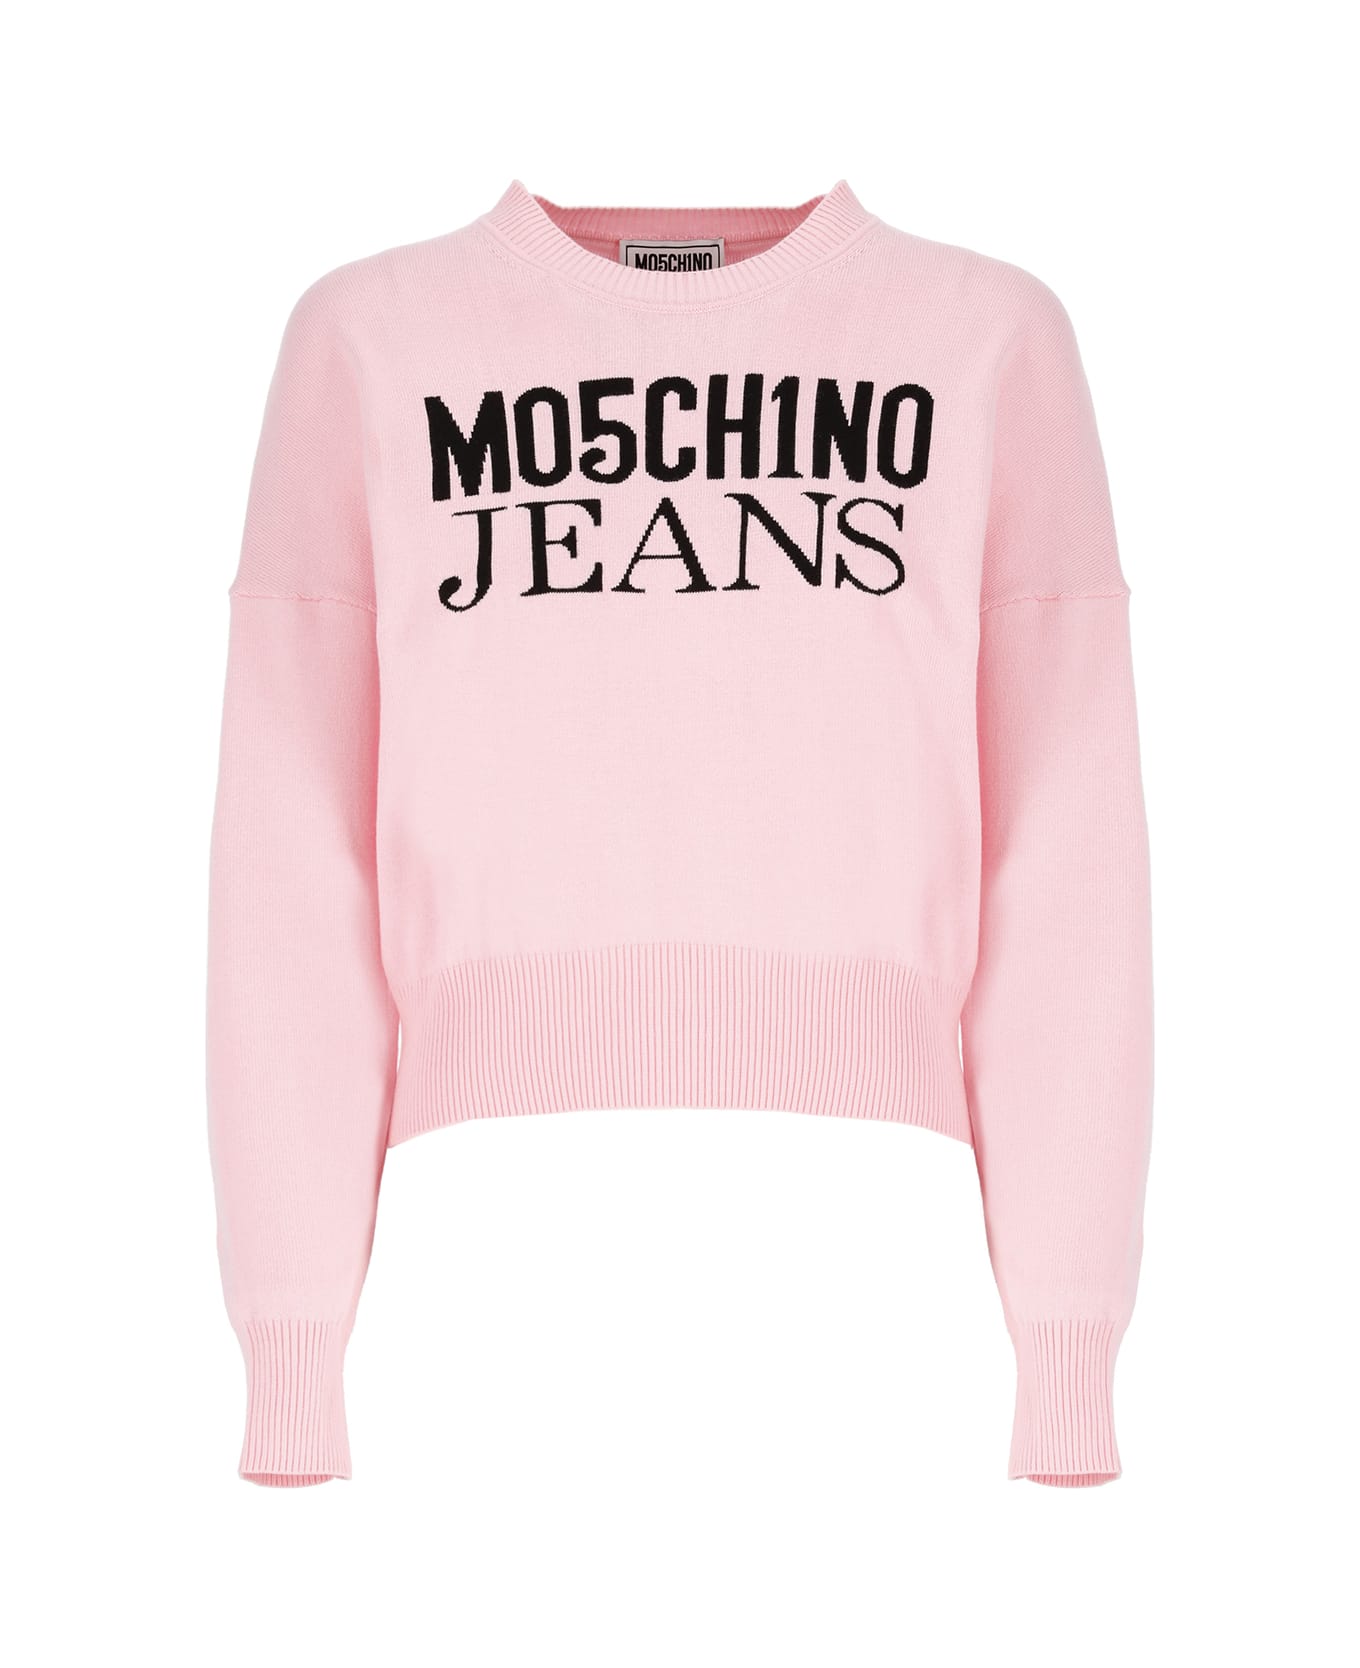 M05CH1N0 Jeans Cotton Sweater - Pink